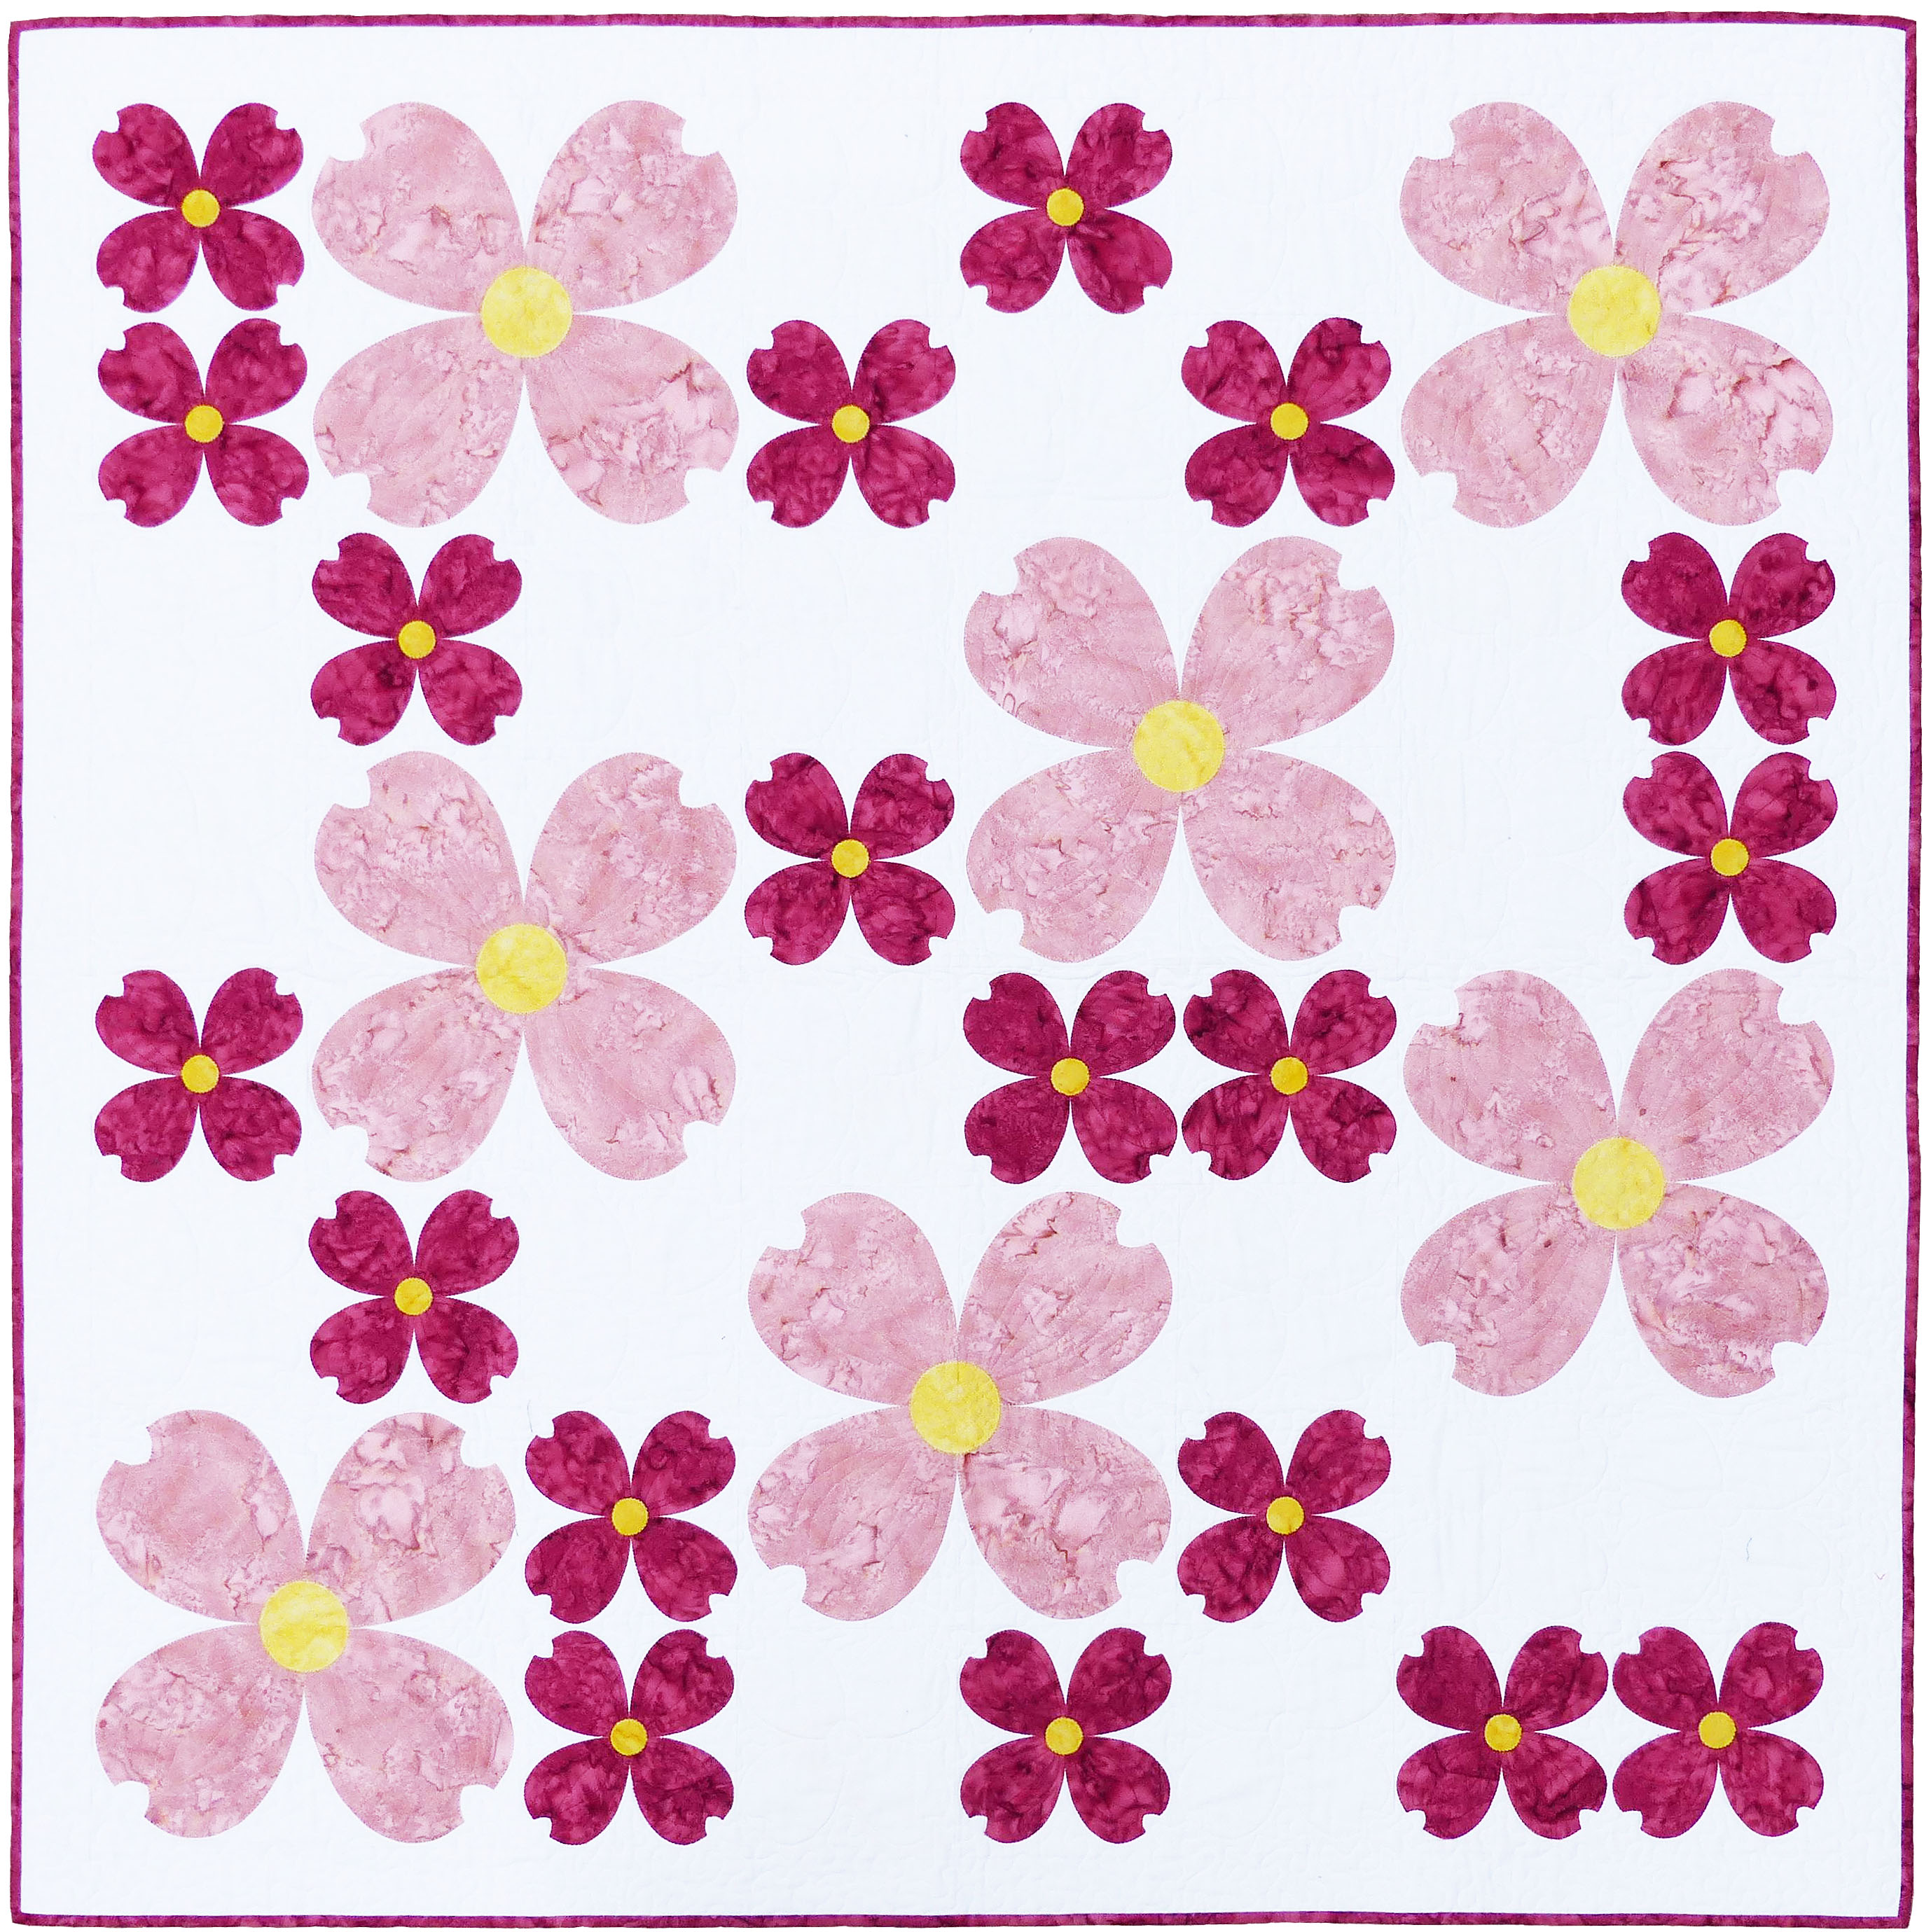 Dogwood Dreams pattern | Flying Parrot Quilts | www.flyingparrotquilts.com